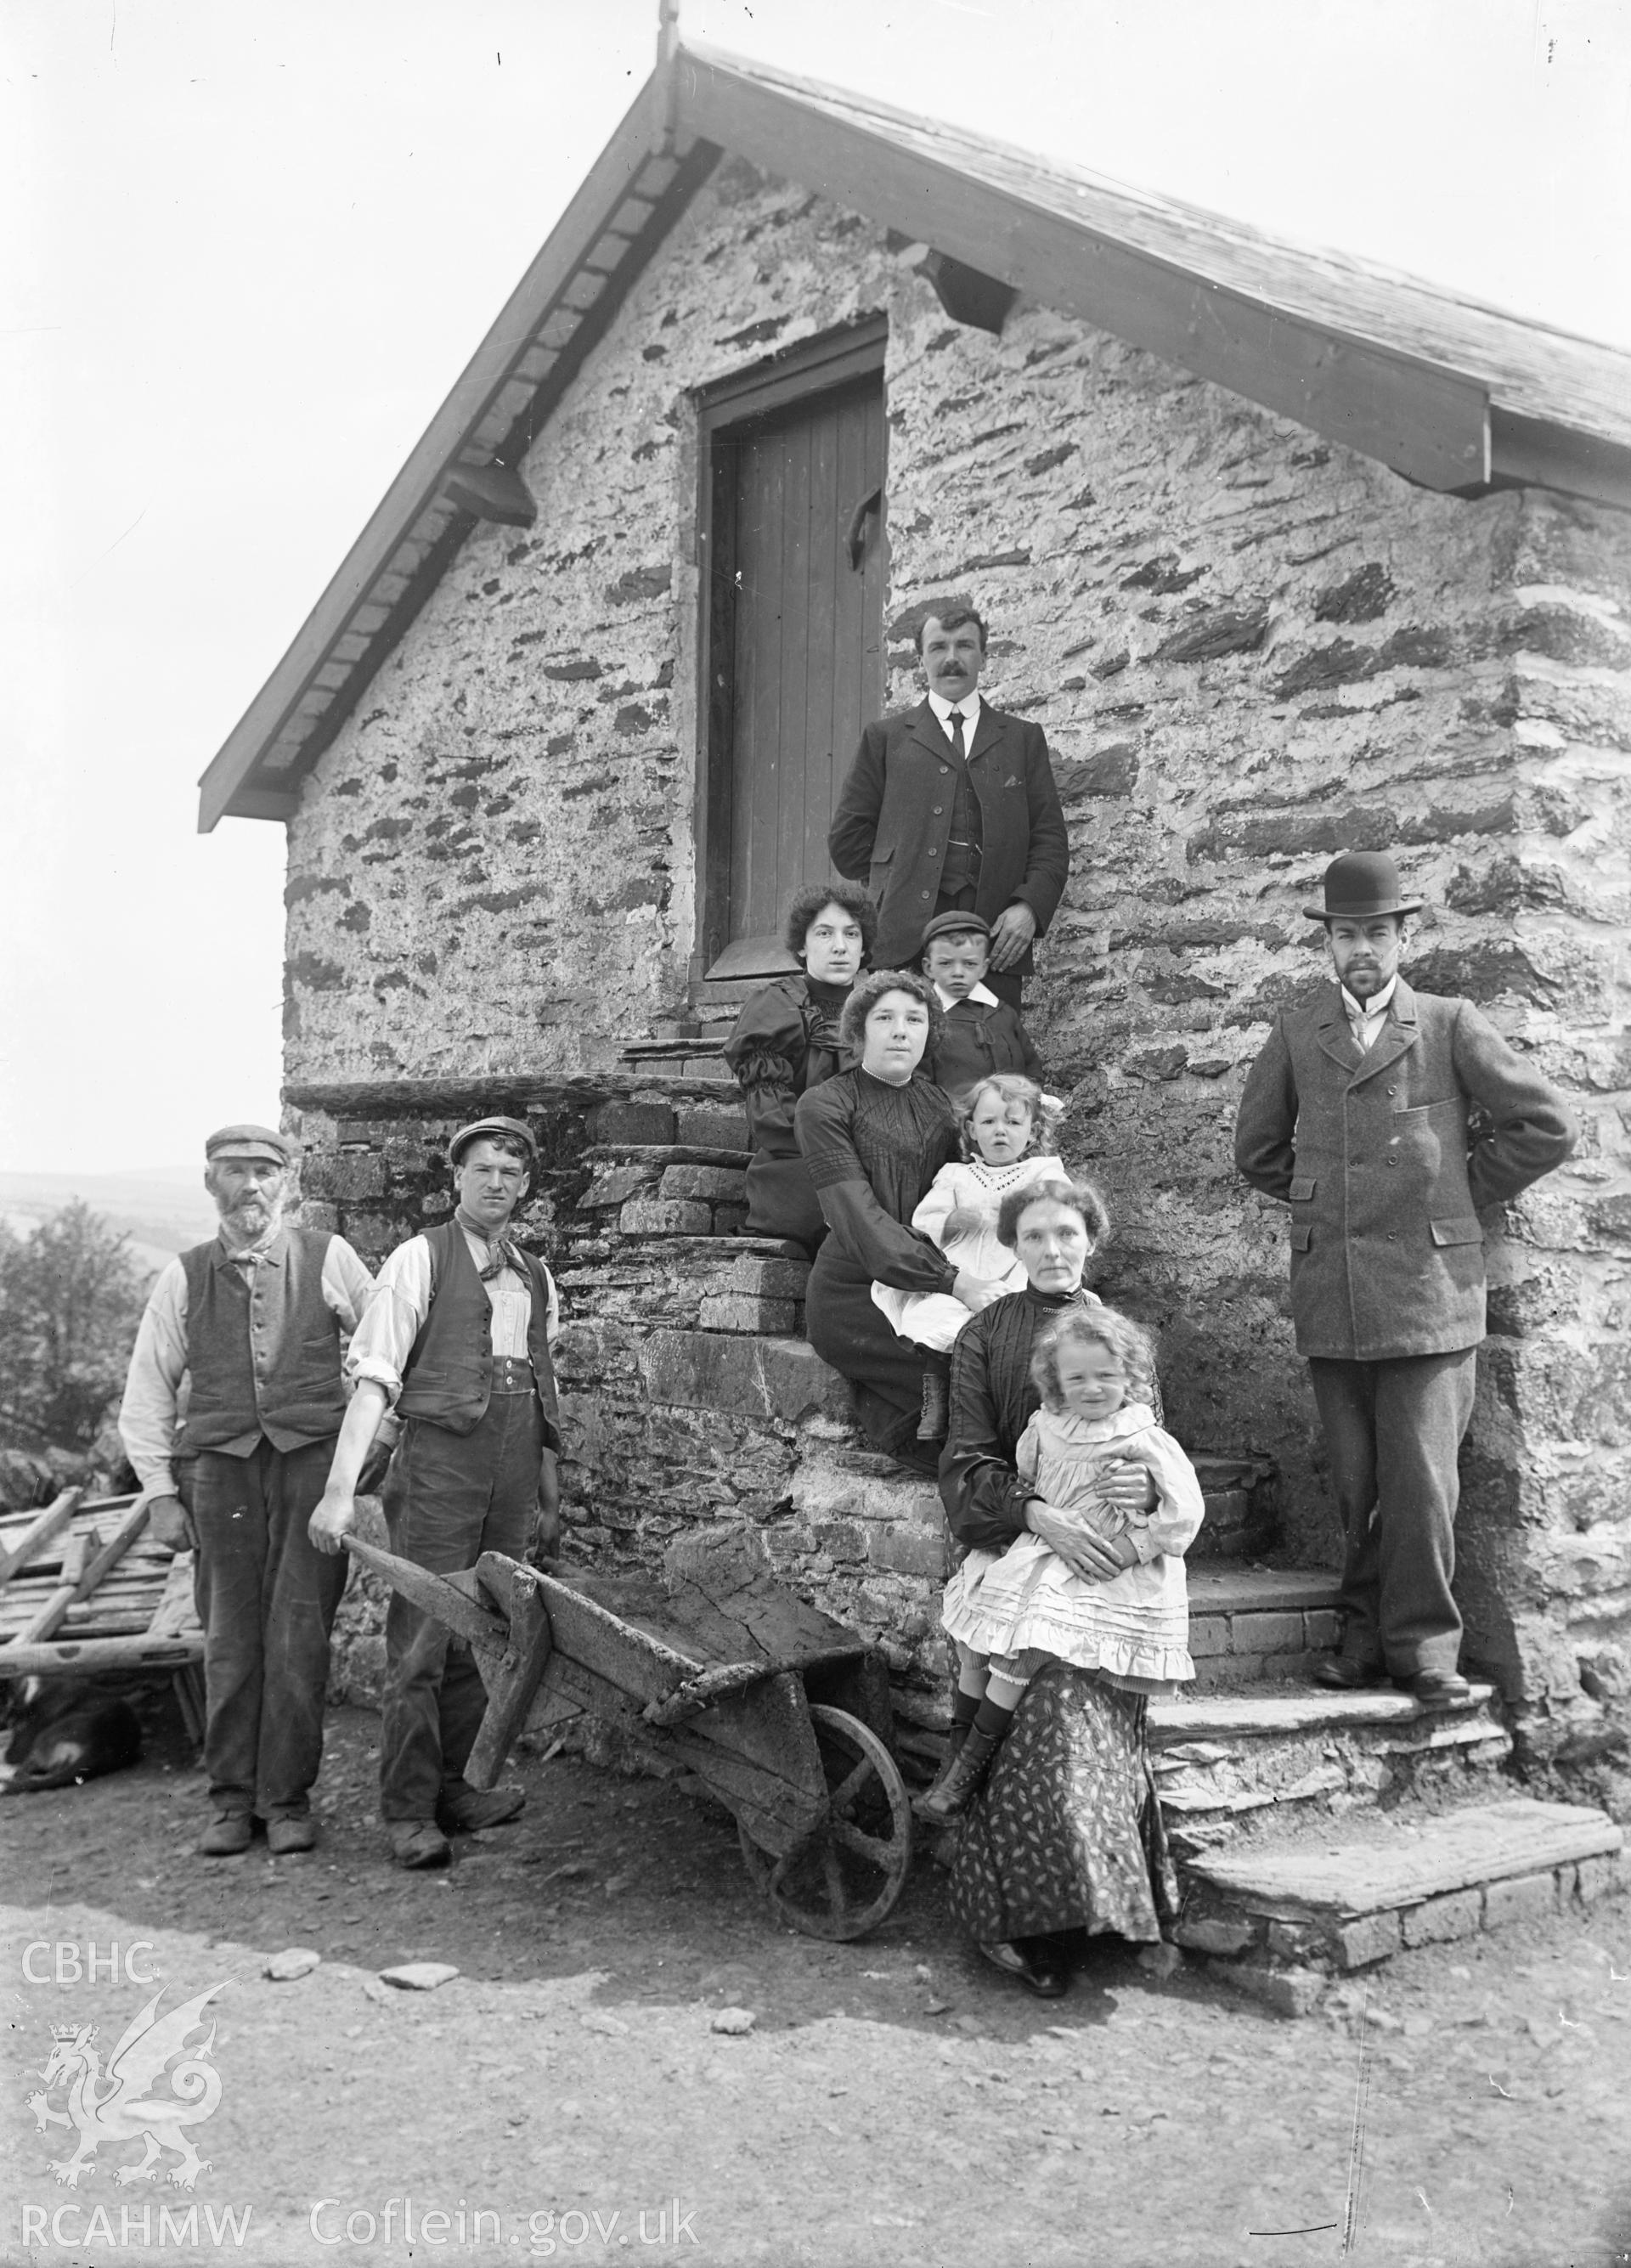 Black and white glass negative showing family group on the steps of a farm outbuilding.